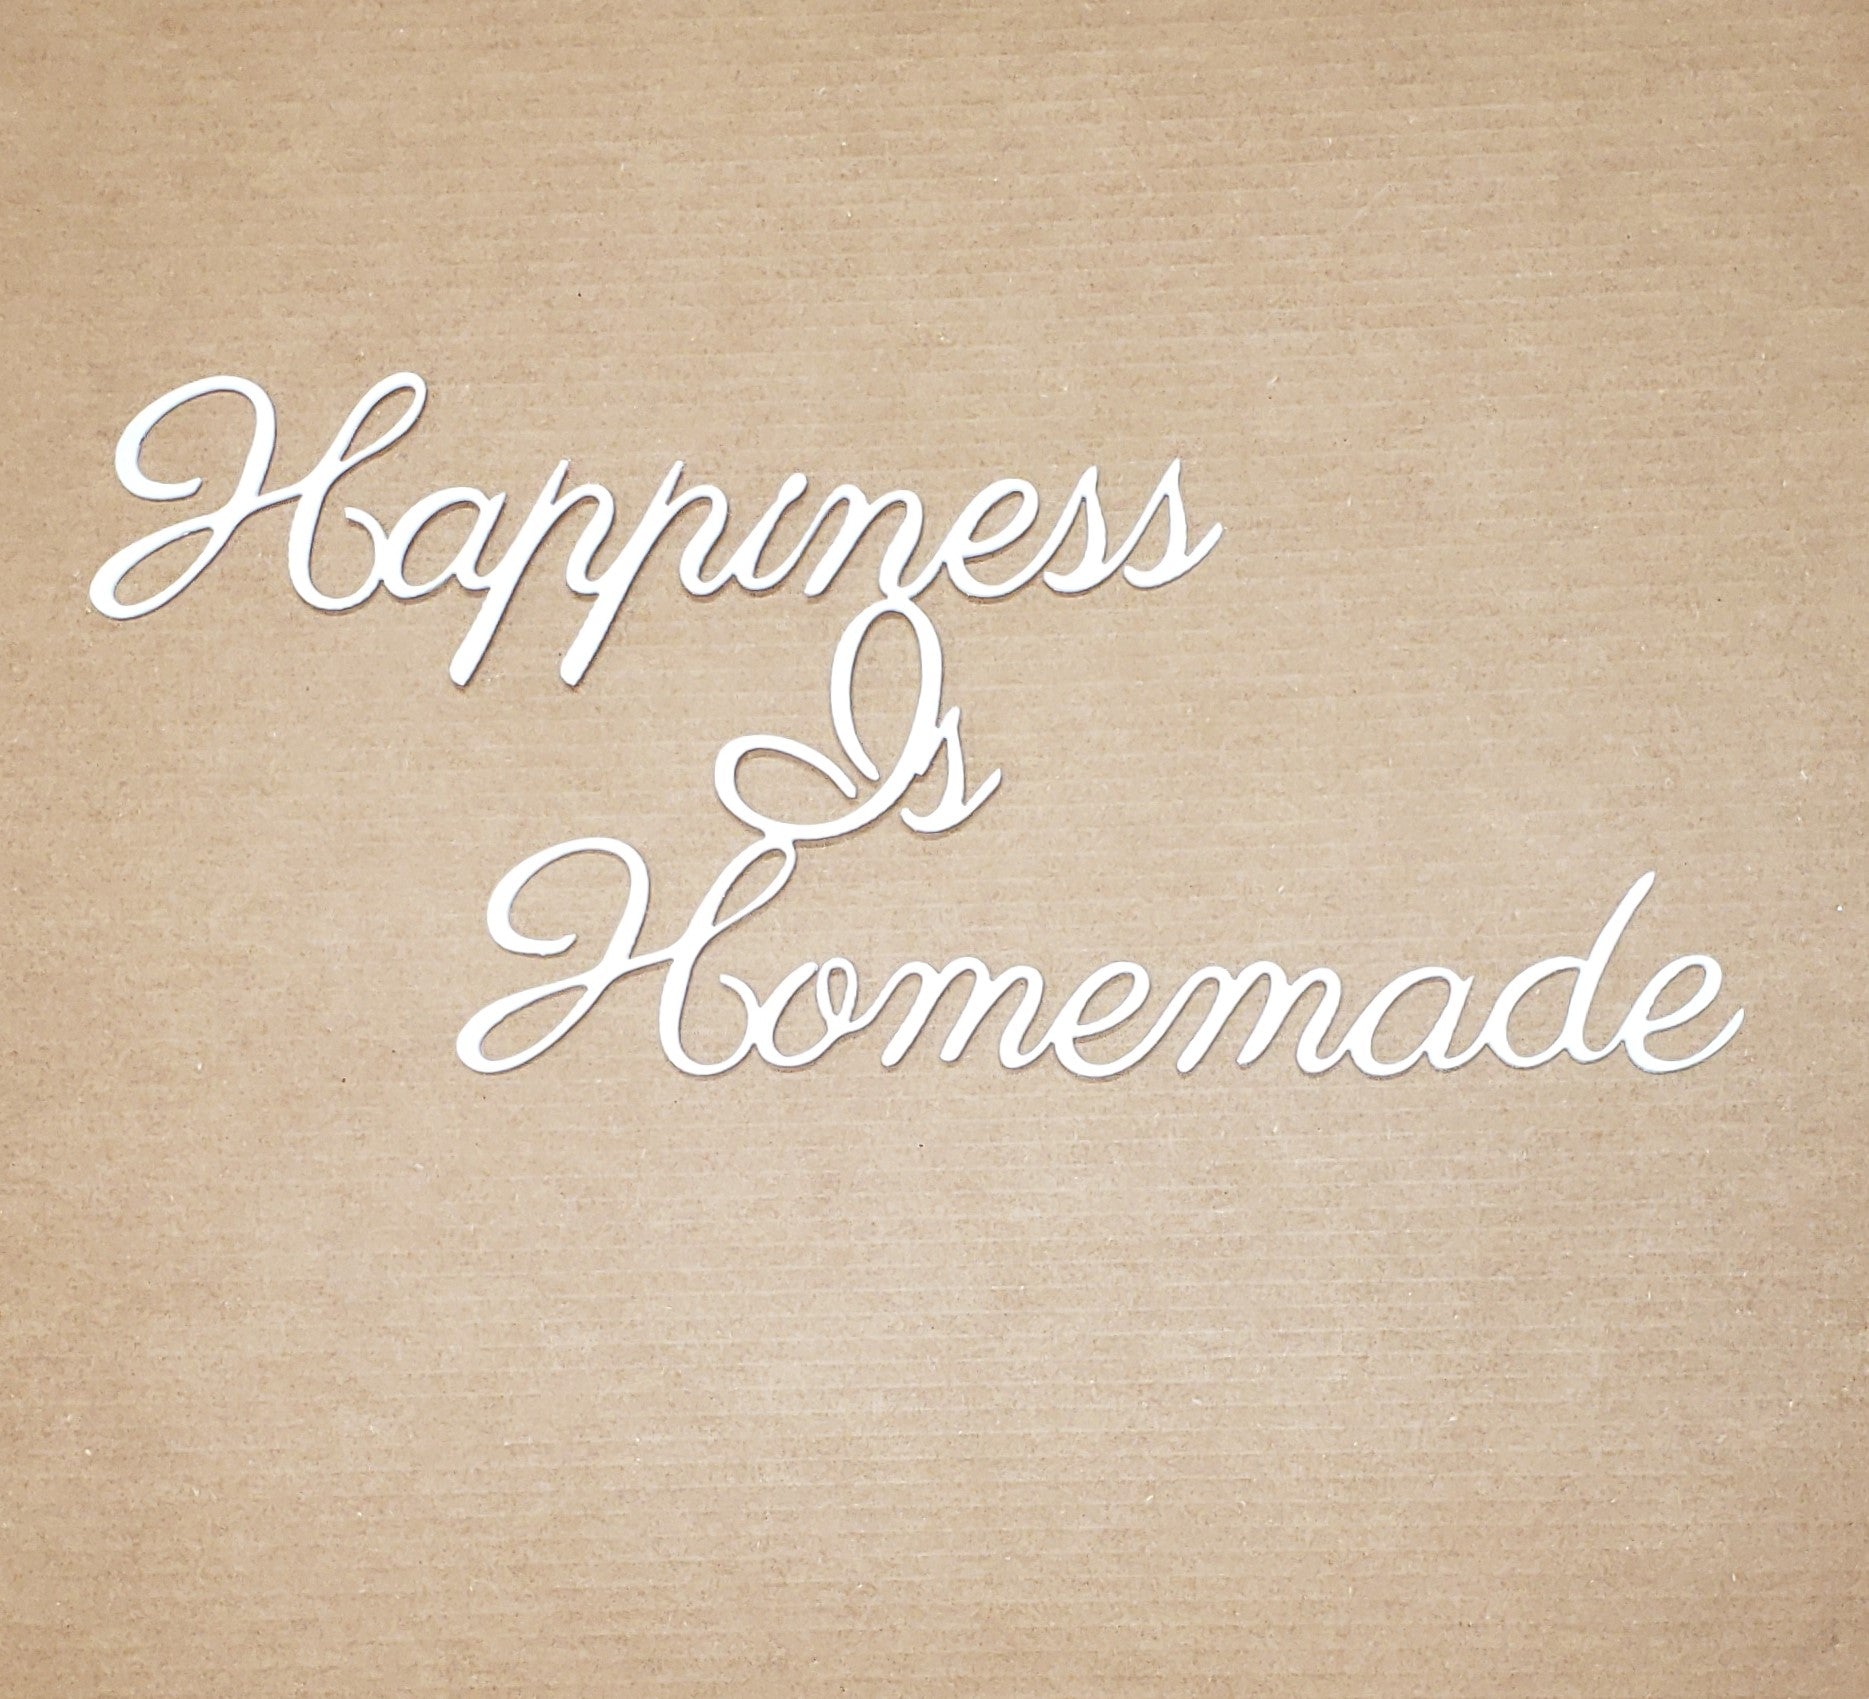 FREE Printables - Happiness is Homemade